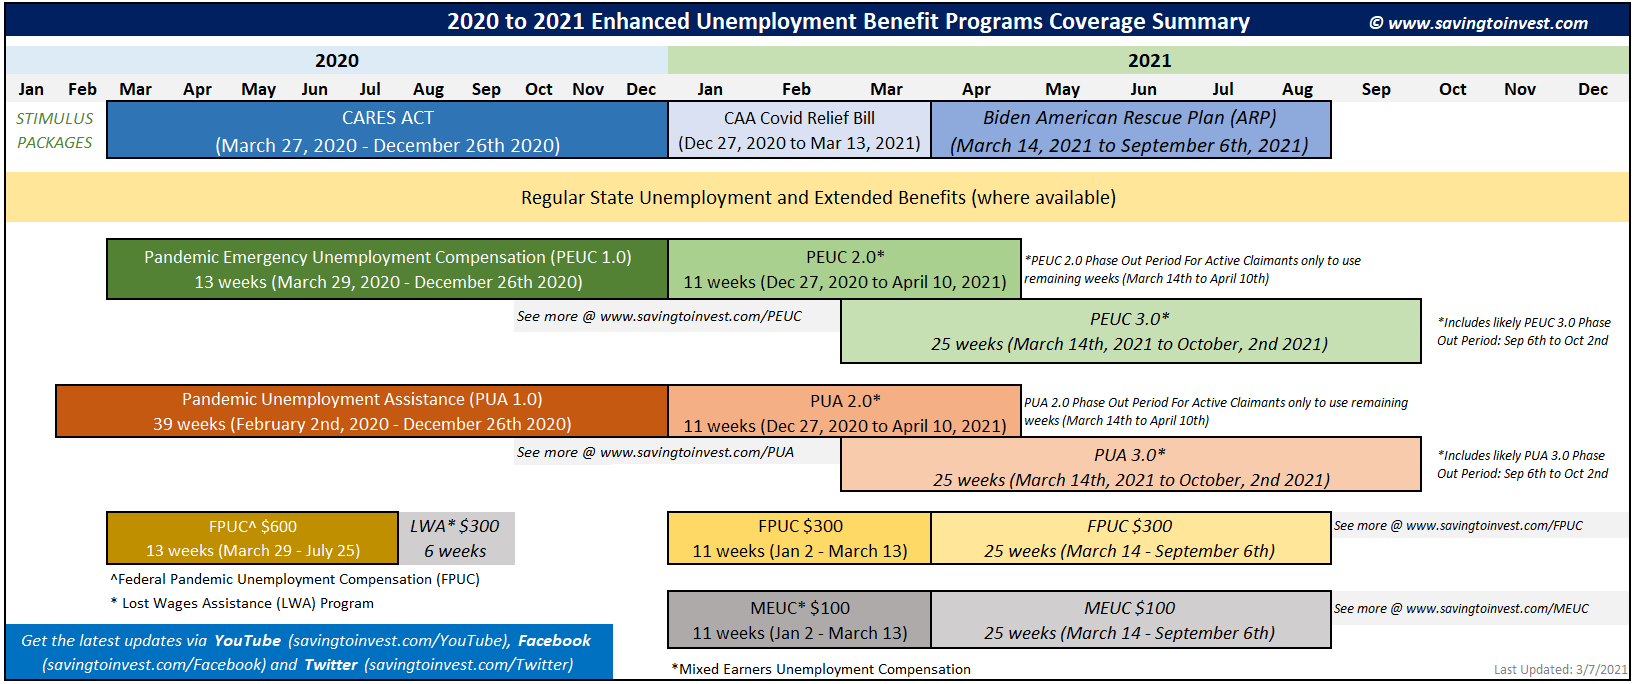 Figure 2: 2020 to 2021 Enhanced Unemployment Benefit Programs Coverage Summary (Source)